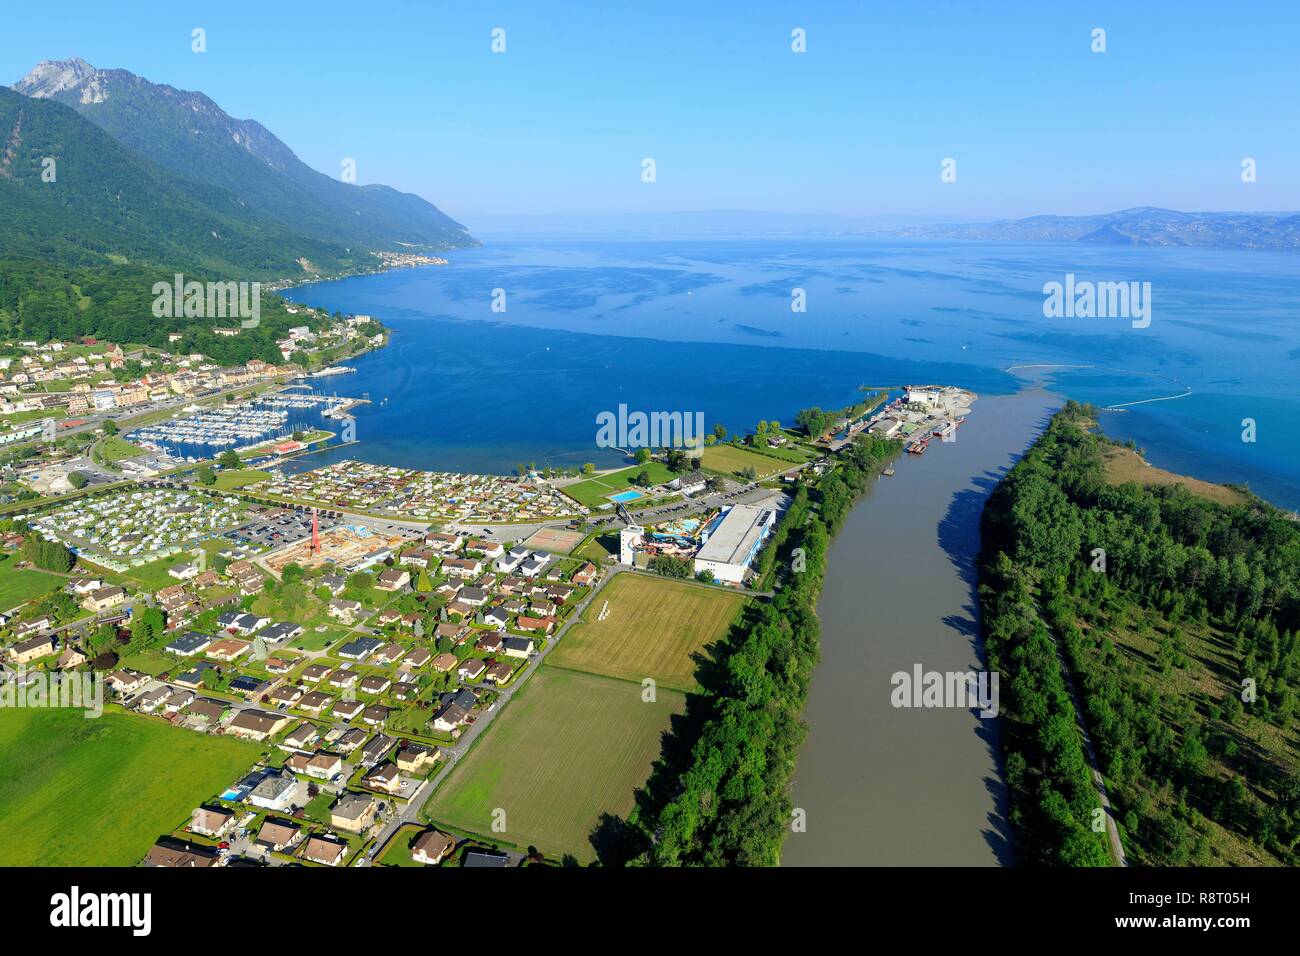 Switzerland, canton of Vaud district of Aigle and canton of Valais, district of Monthey, Port Valais, Lake Geneva, mouth of the Rhone (aerial view) Stock Photo